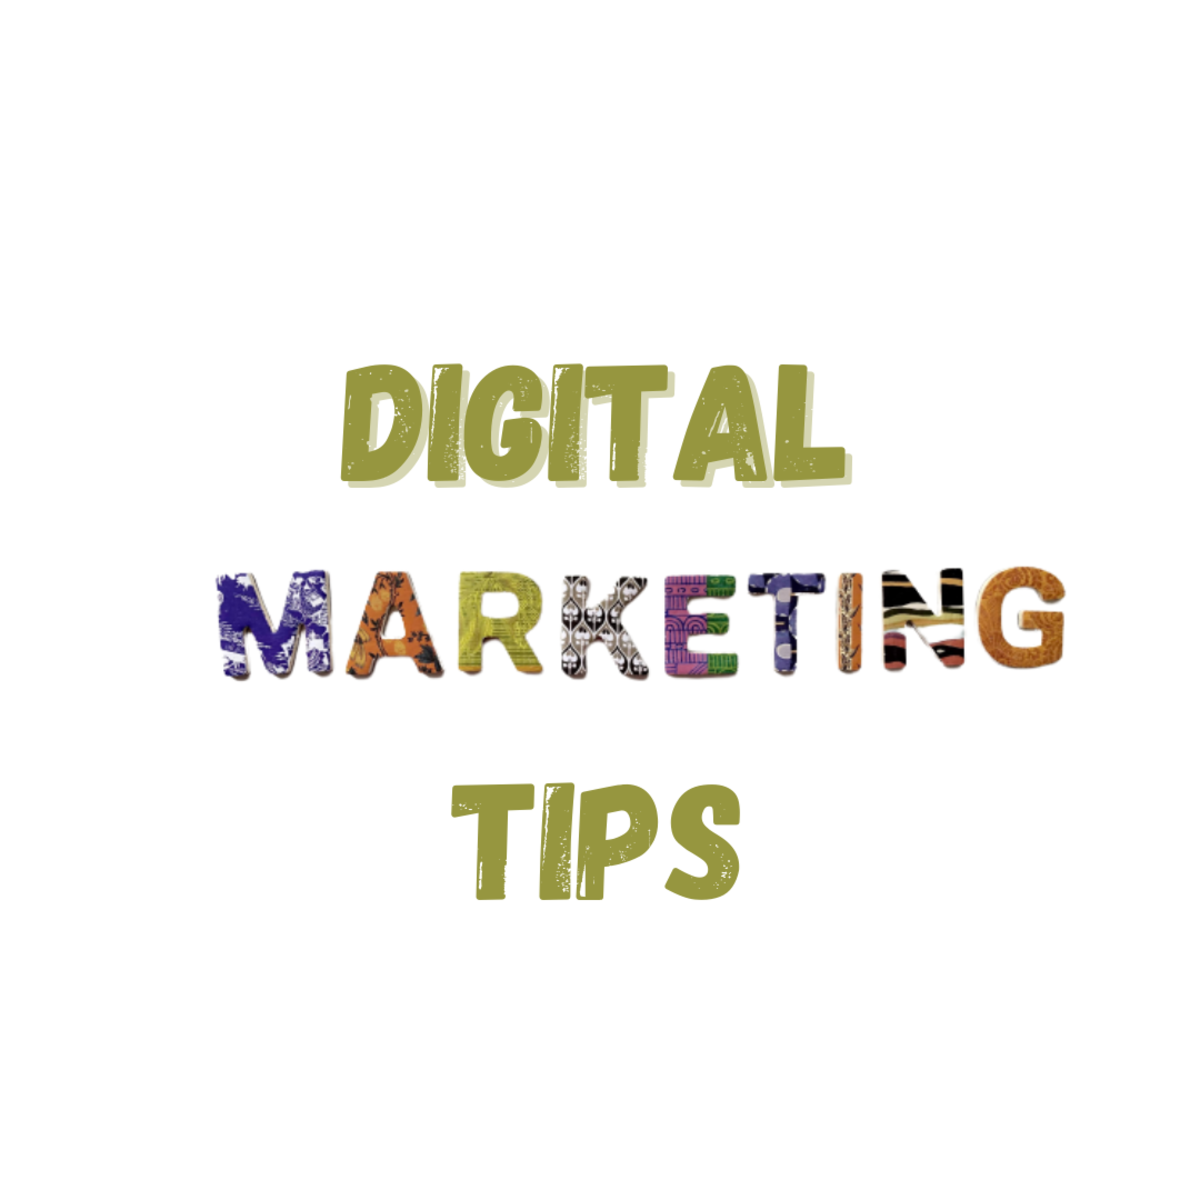 Digital Marketing Tips You Should Consider Once For Your Business